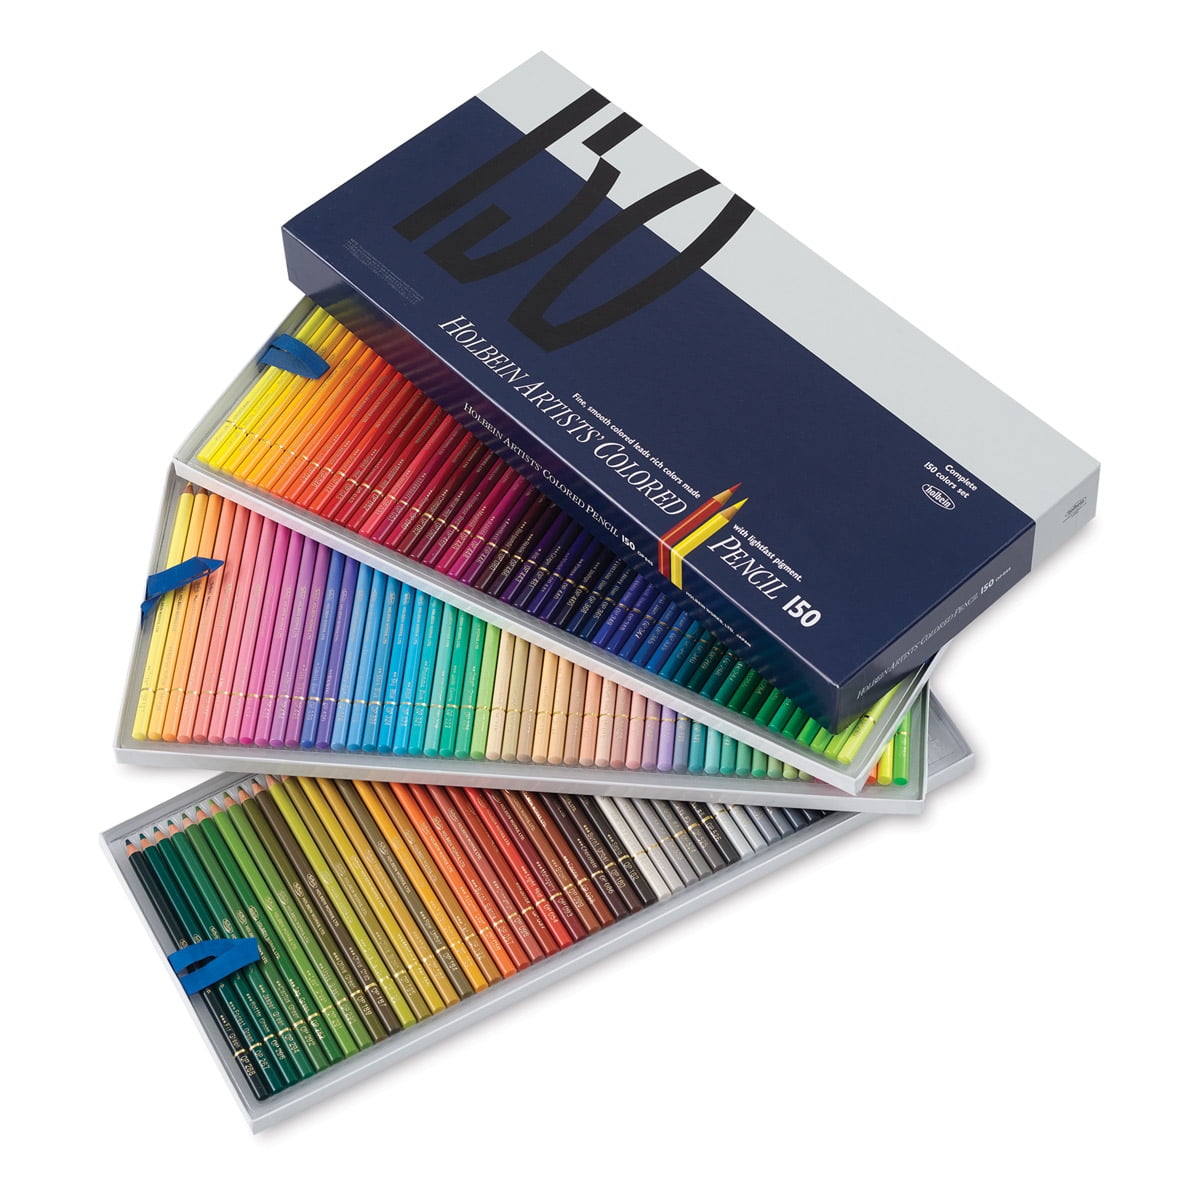 Holbein Artists' Colored Pencil Set of 100